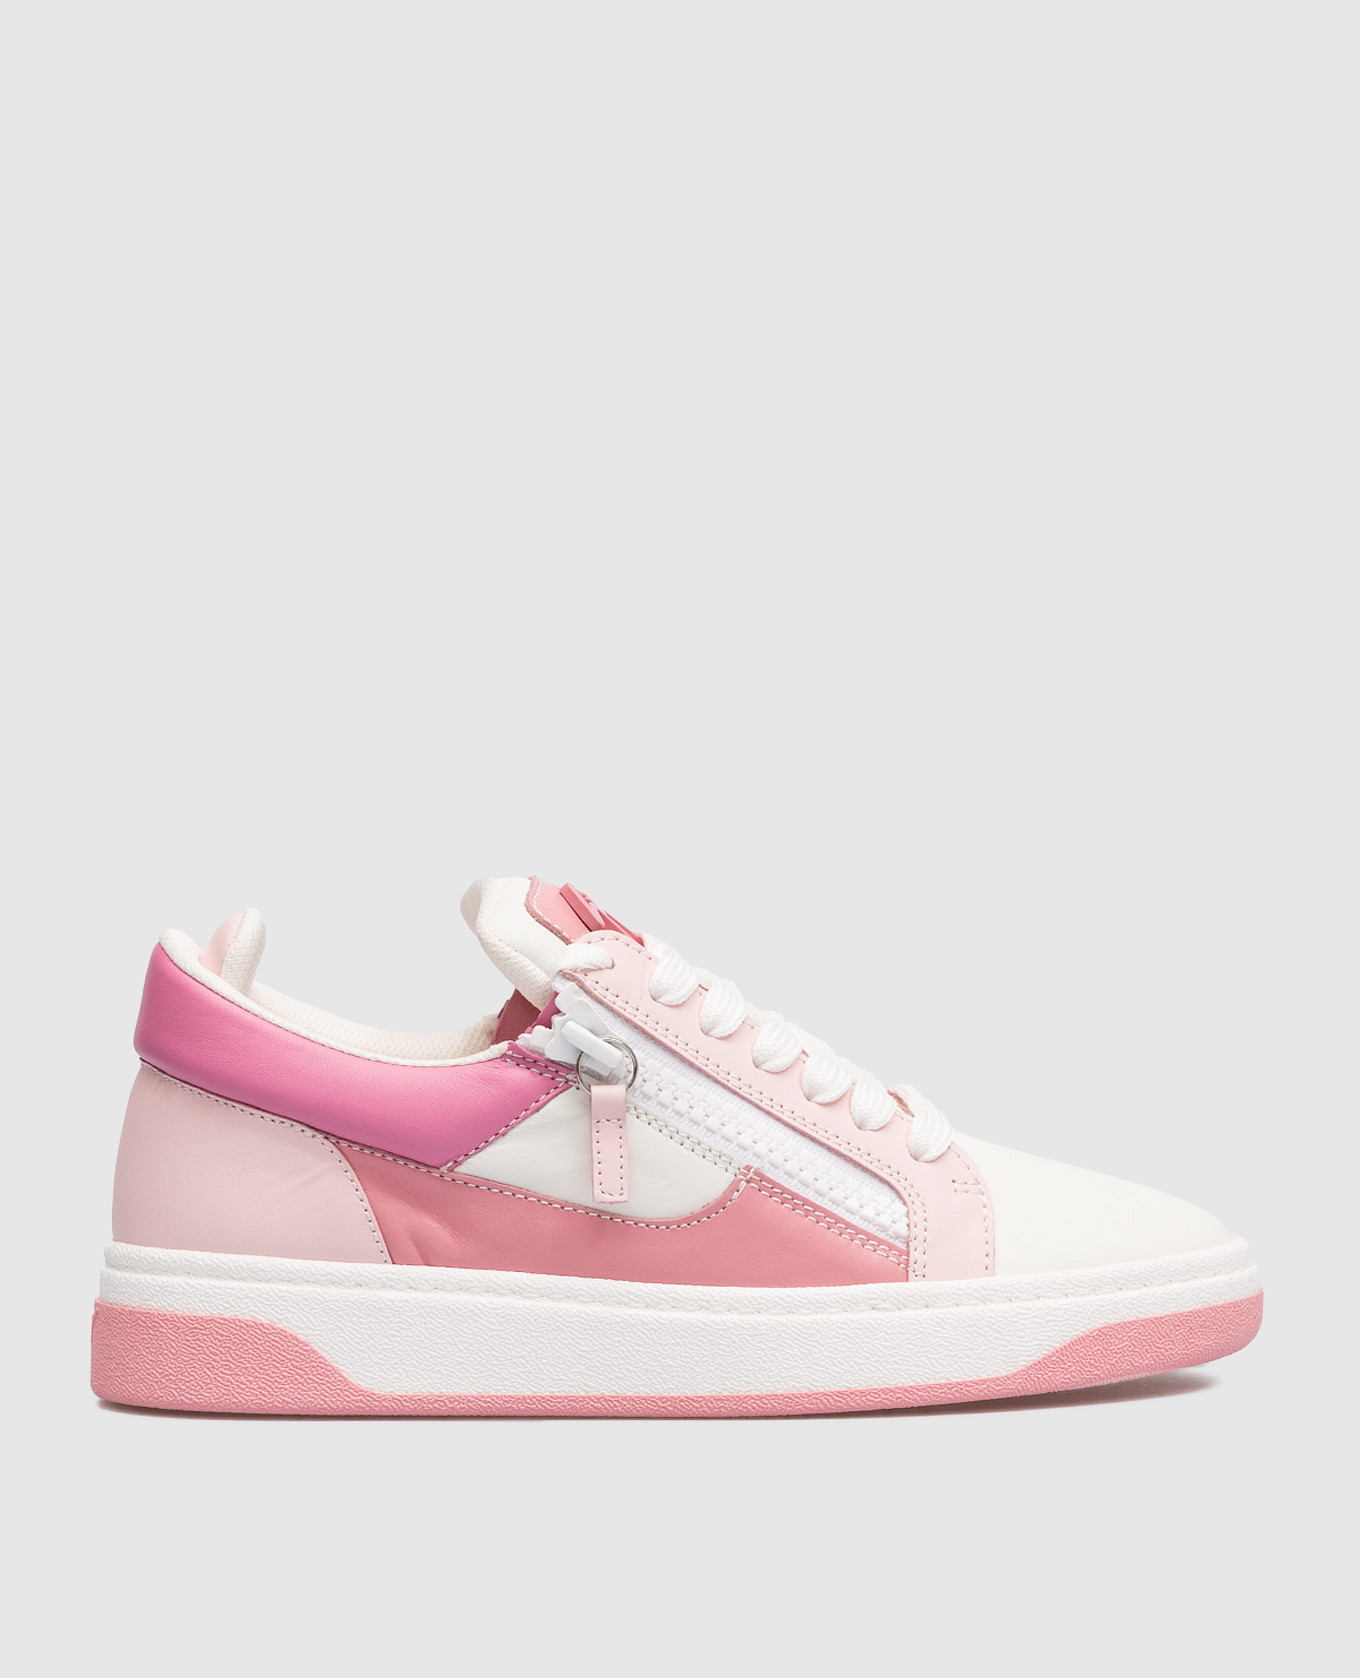 Gz94 pink leather sneakers with metallic logo